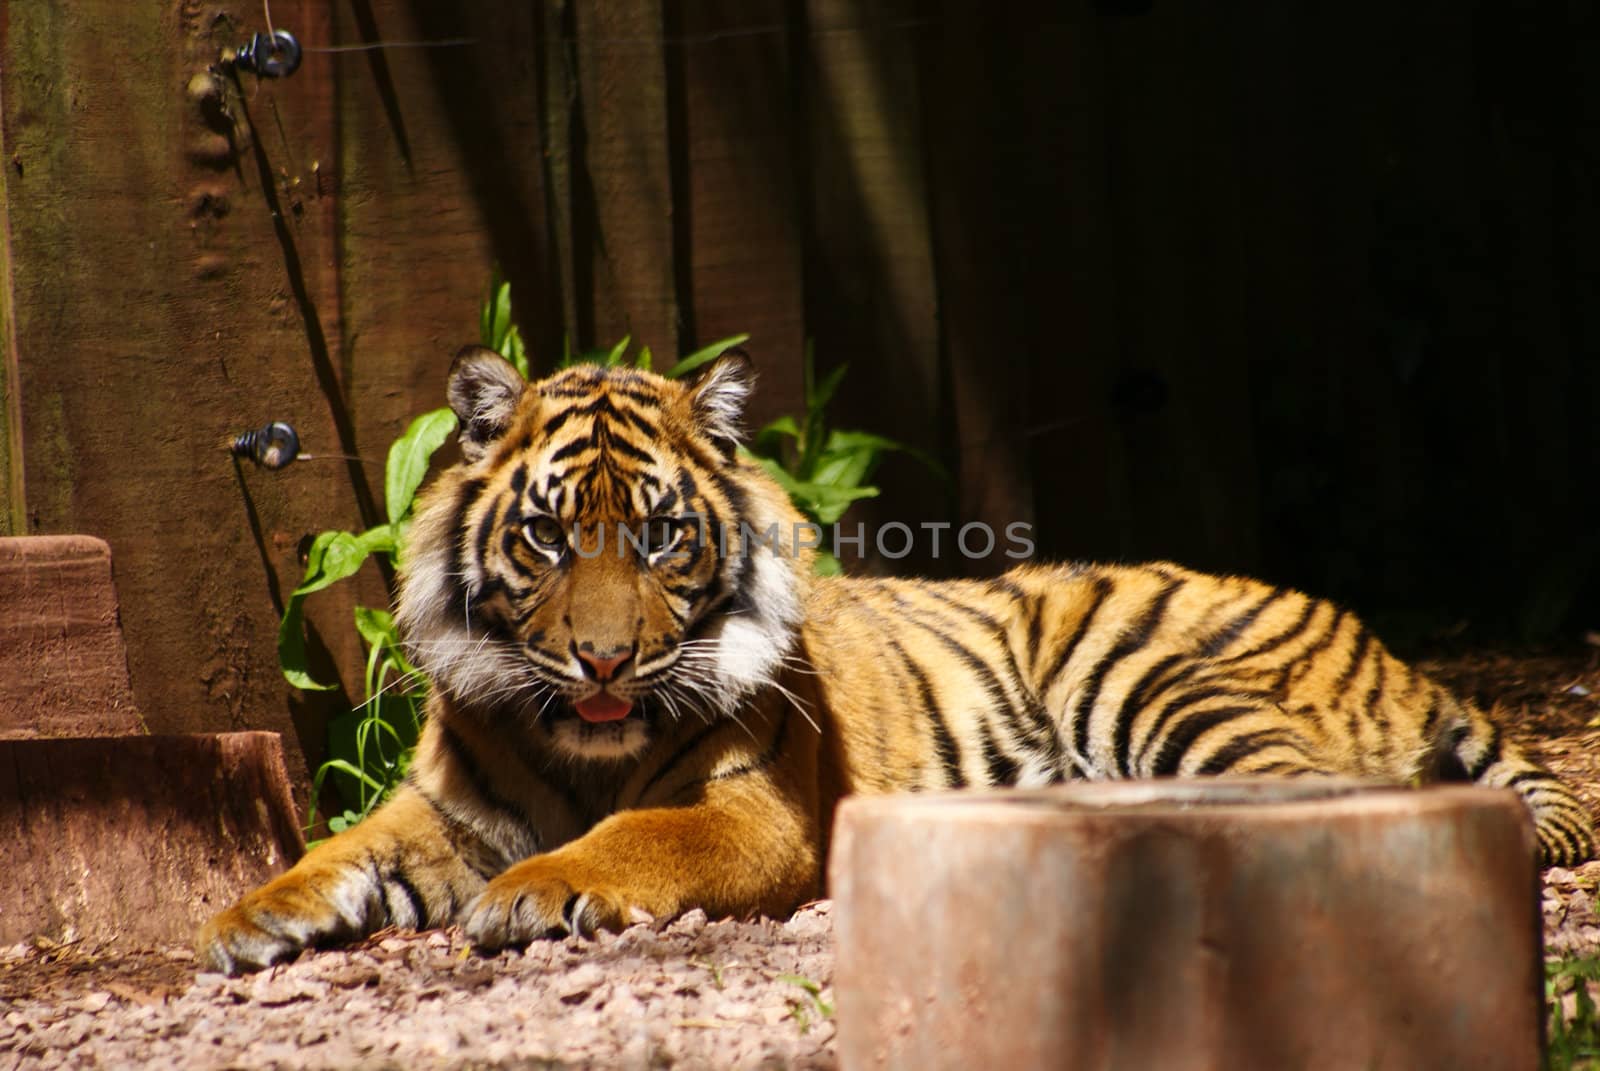 tiger in ZOO  by merc67